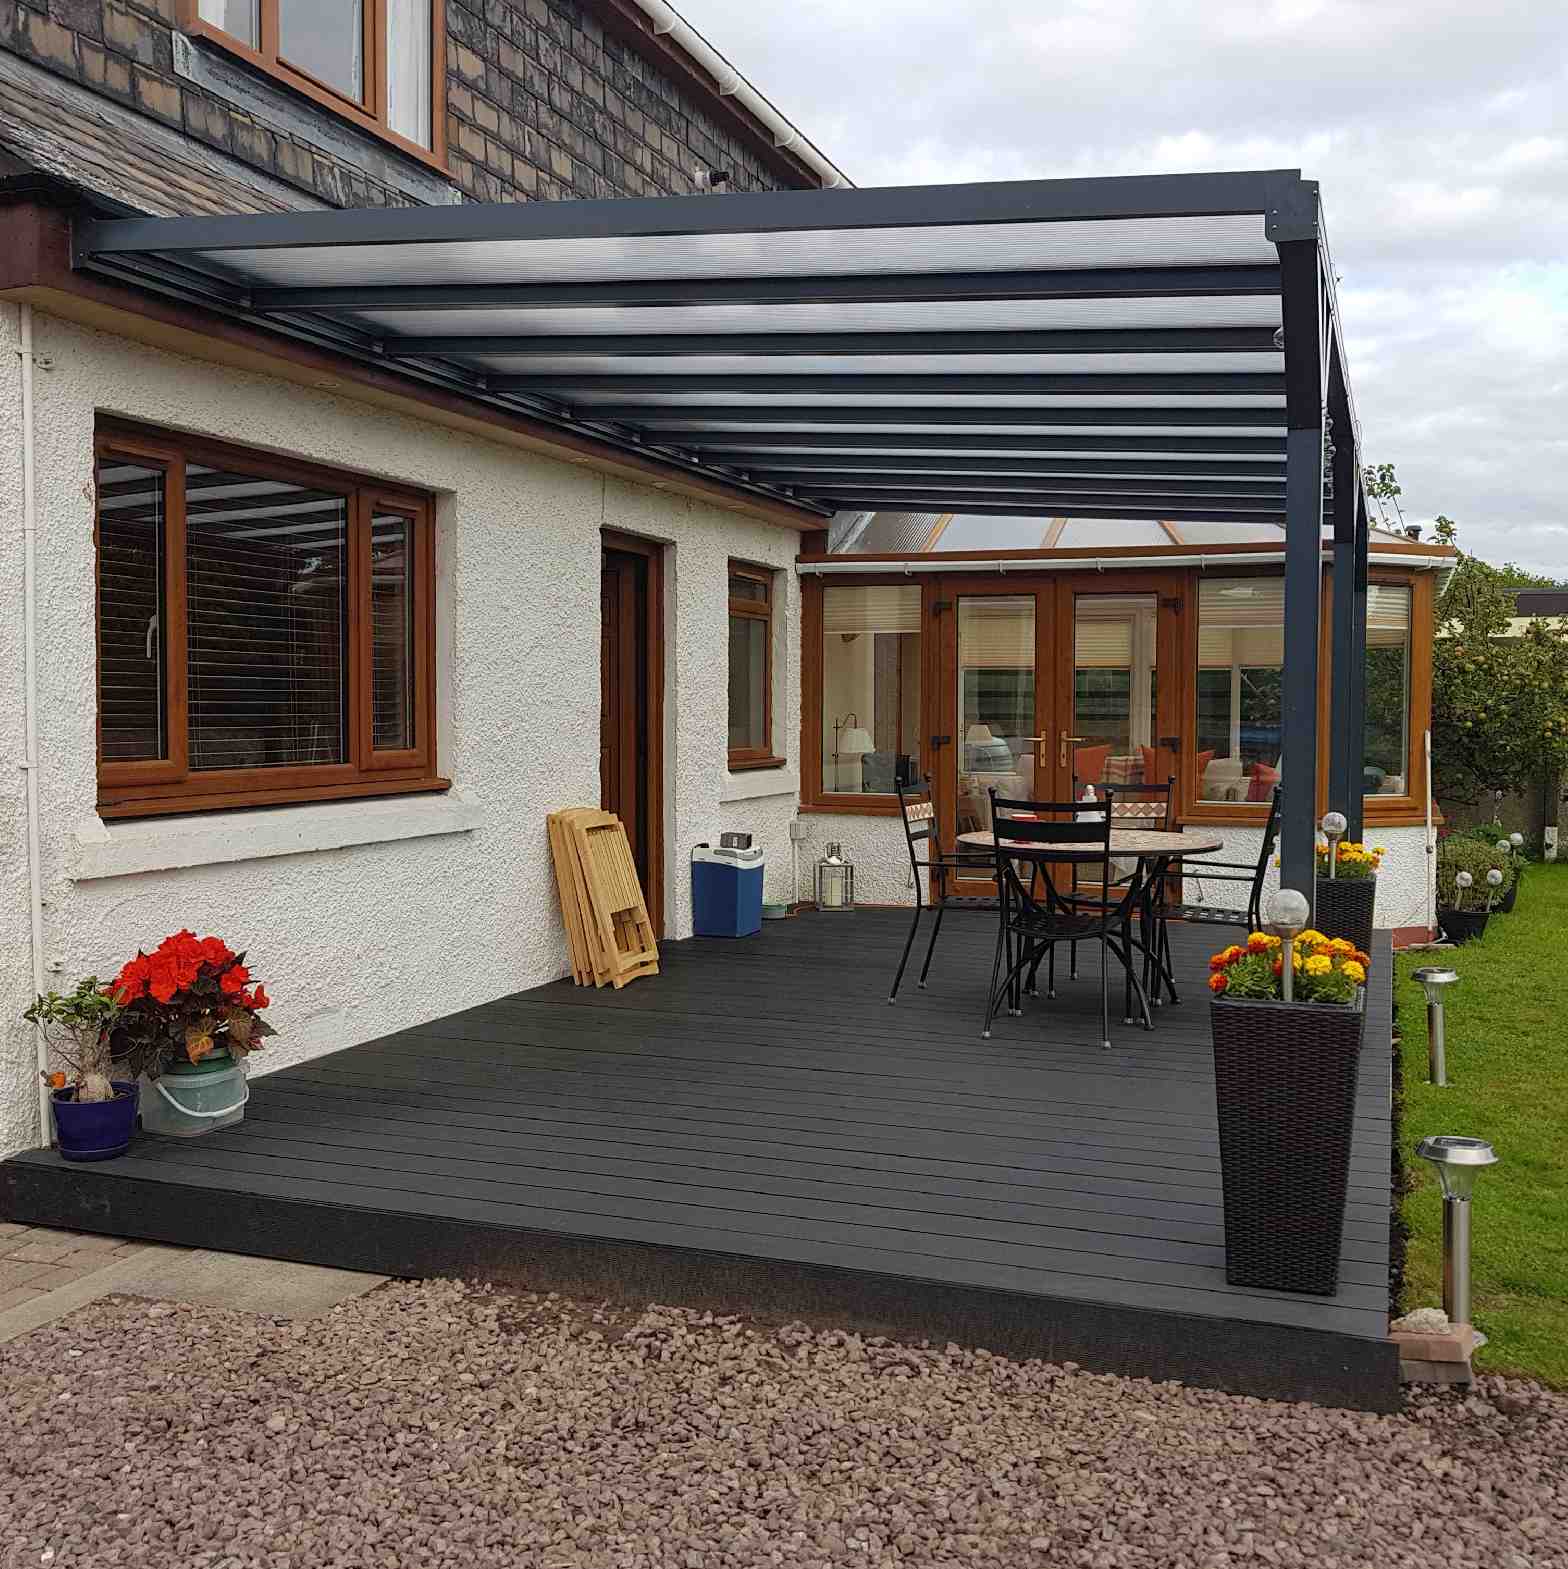 Buy Omega Verandah, Anthracite Grey, 16mm Polycarbonate Glazing - 2.1m (W) x 3.0m (P), (2) Supporting Posts online today